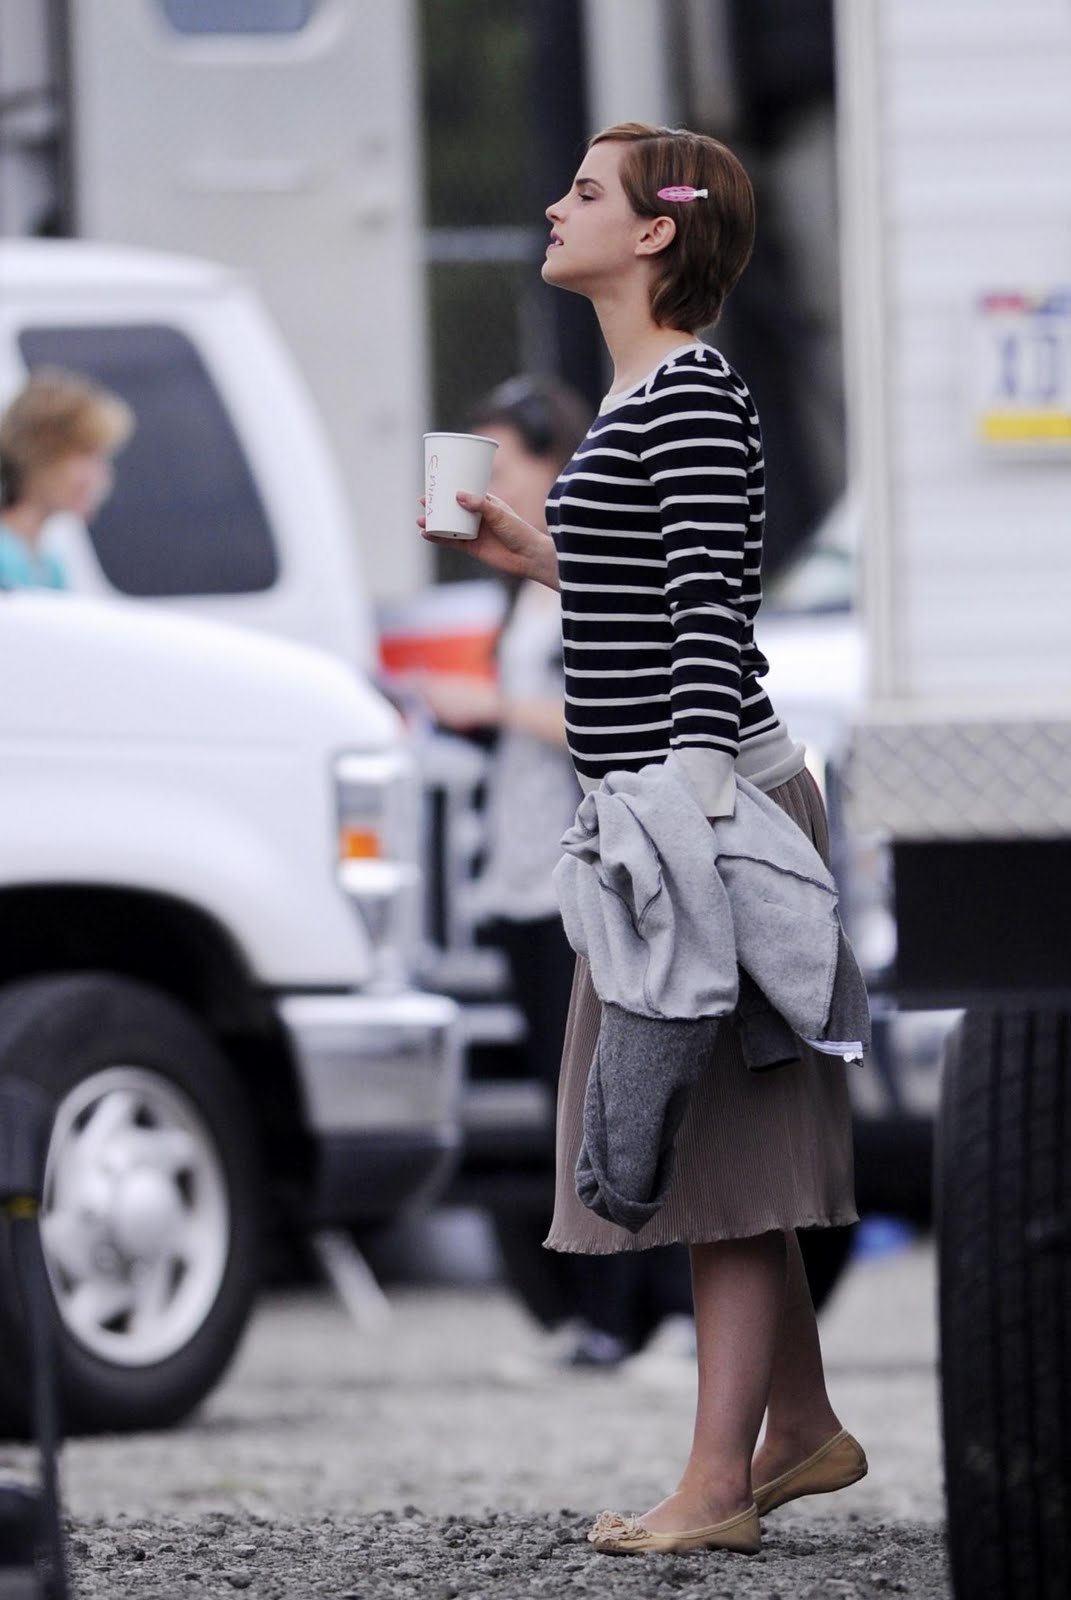 Emma Watson on the set of "Perks of Being a Wallflower" NEW PICTU...